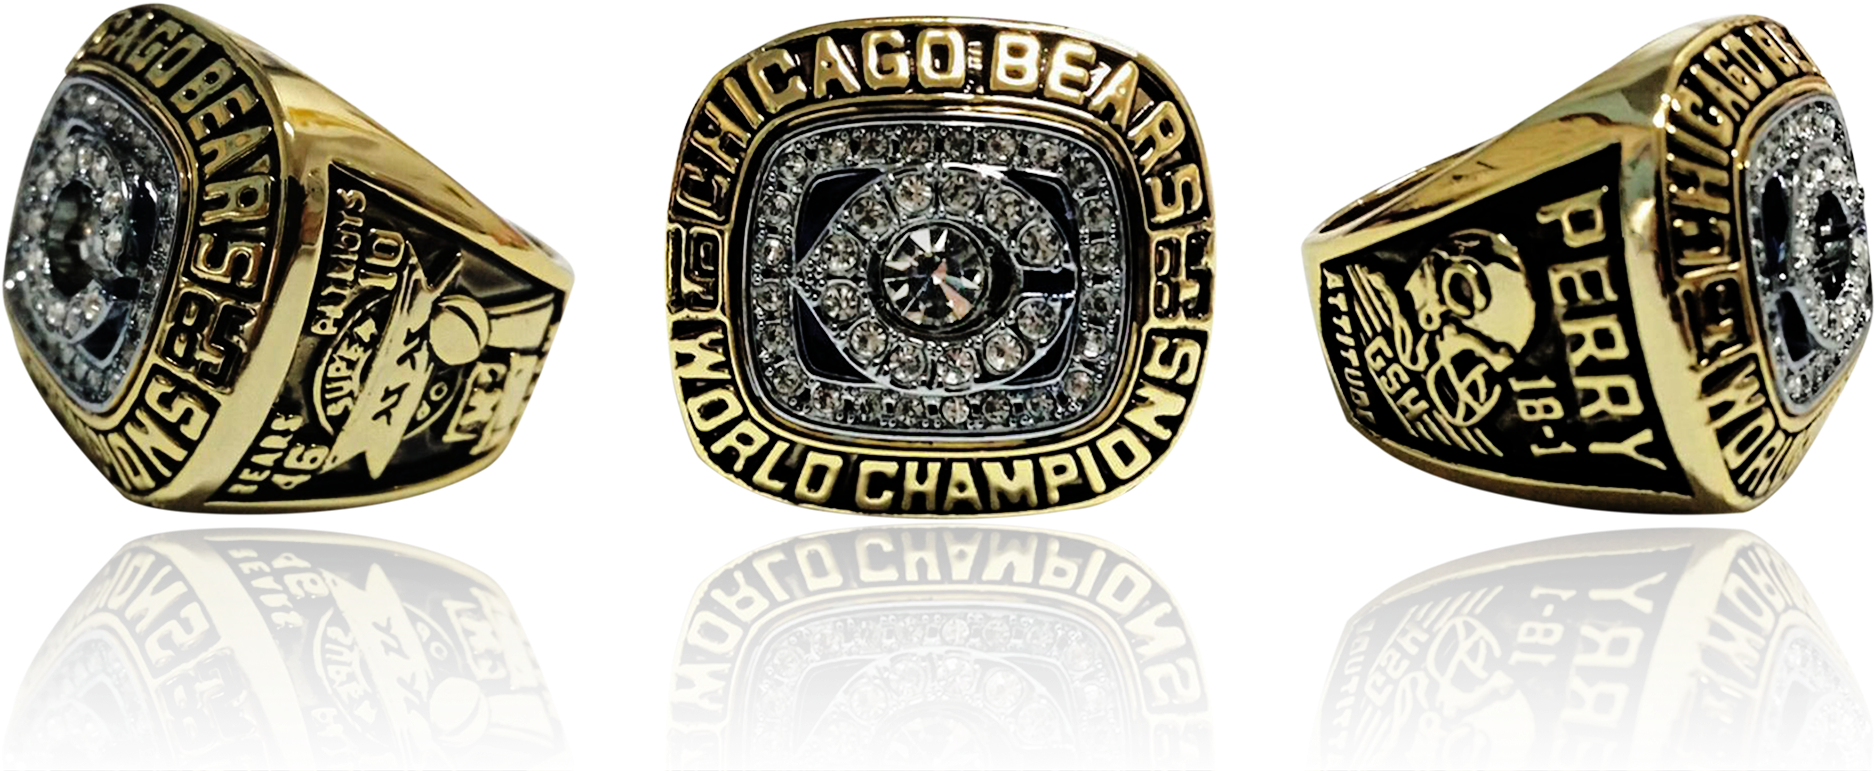 Chicago Bears Super Bowl Championship Ring PNG